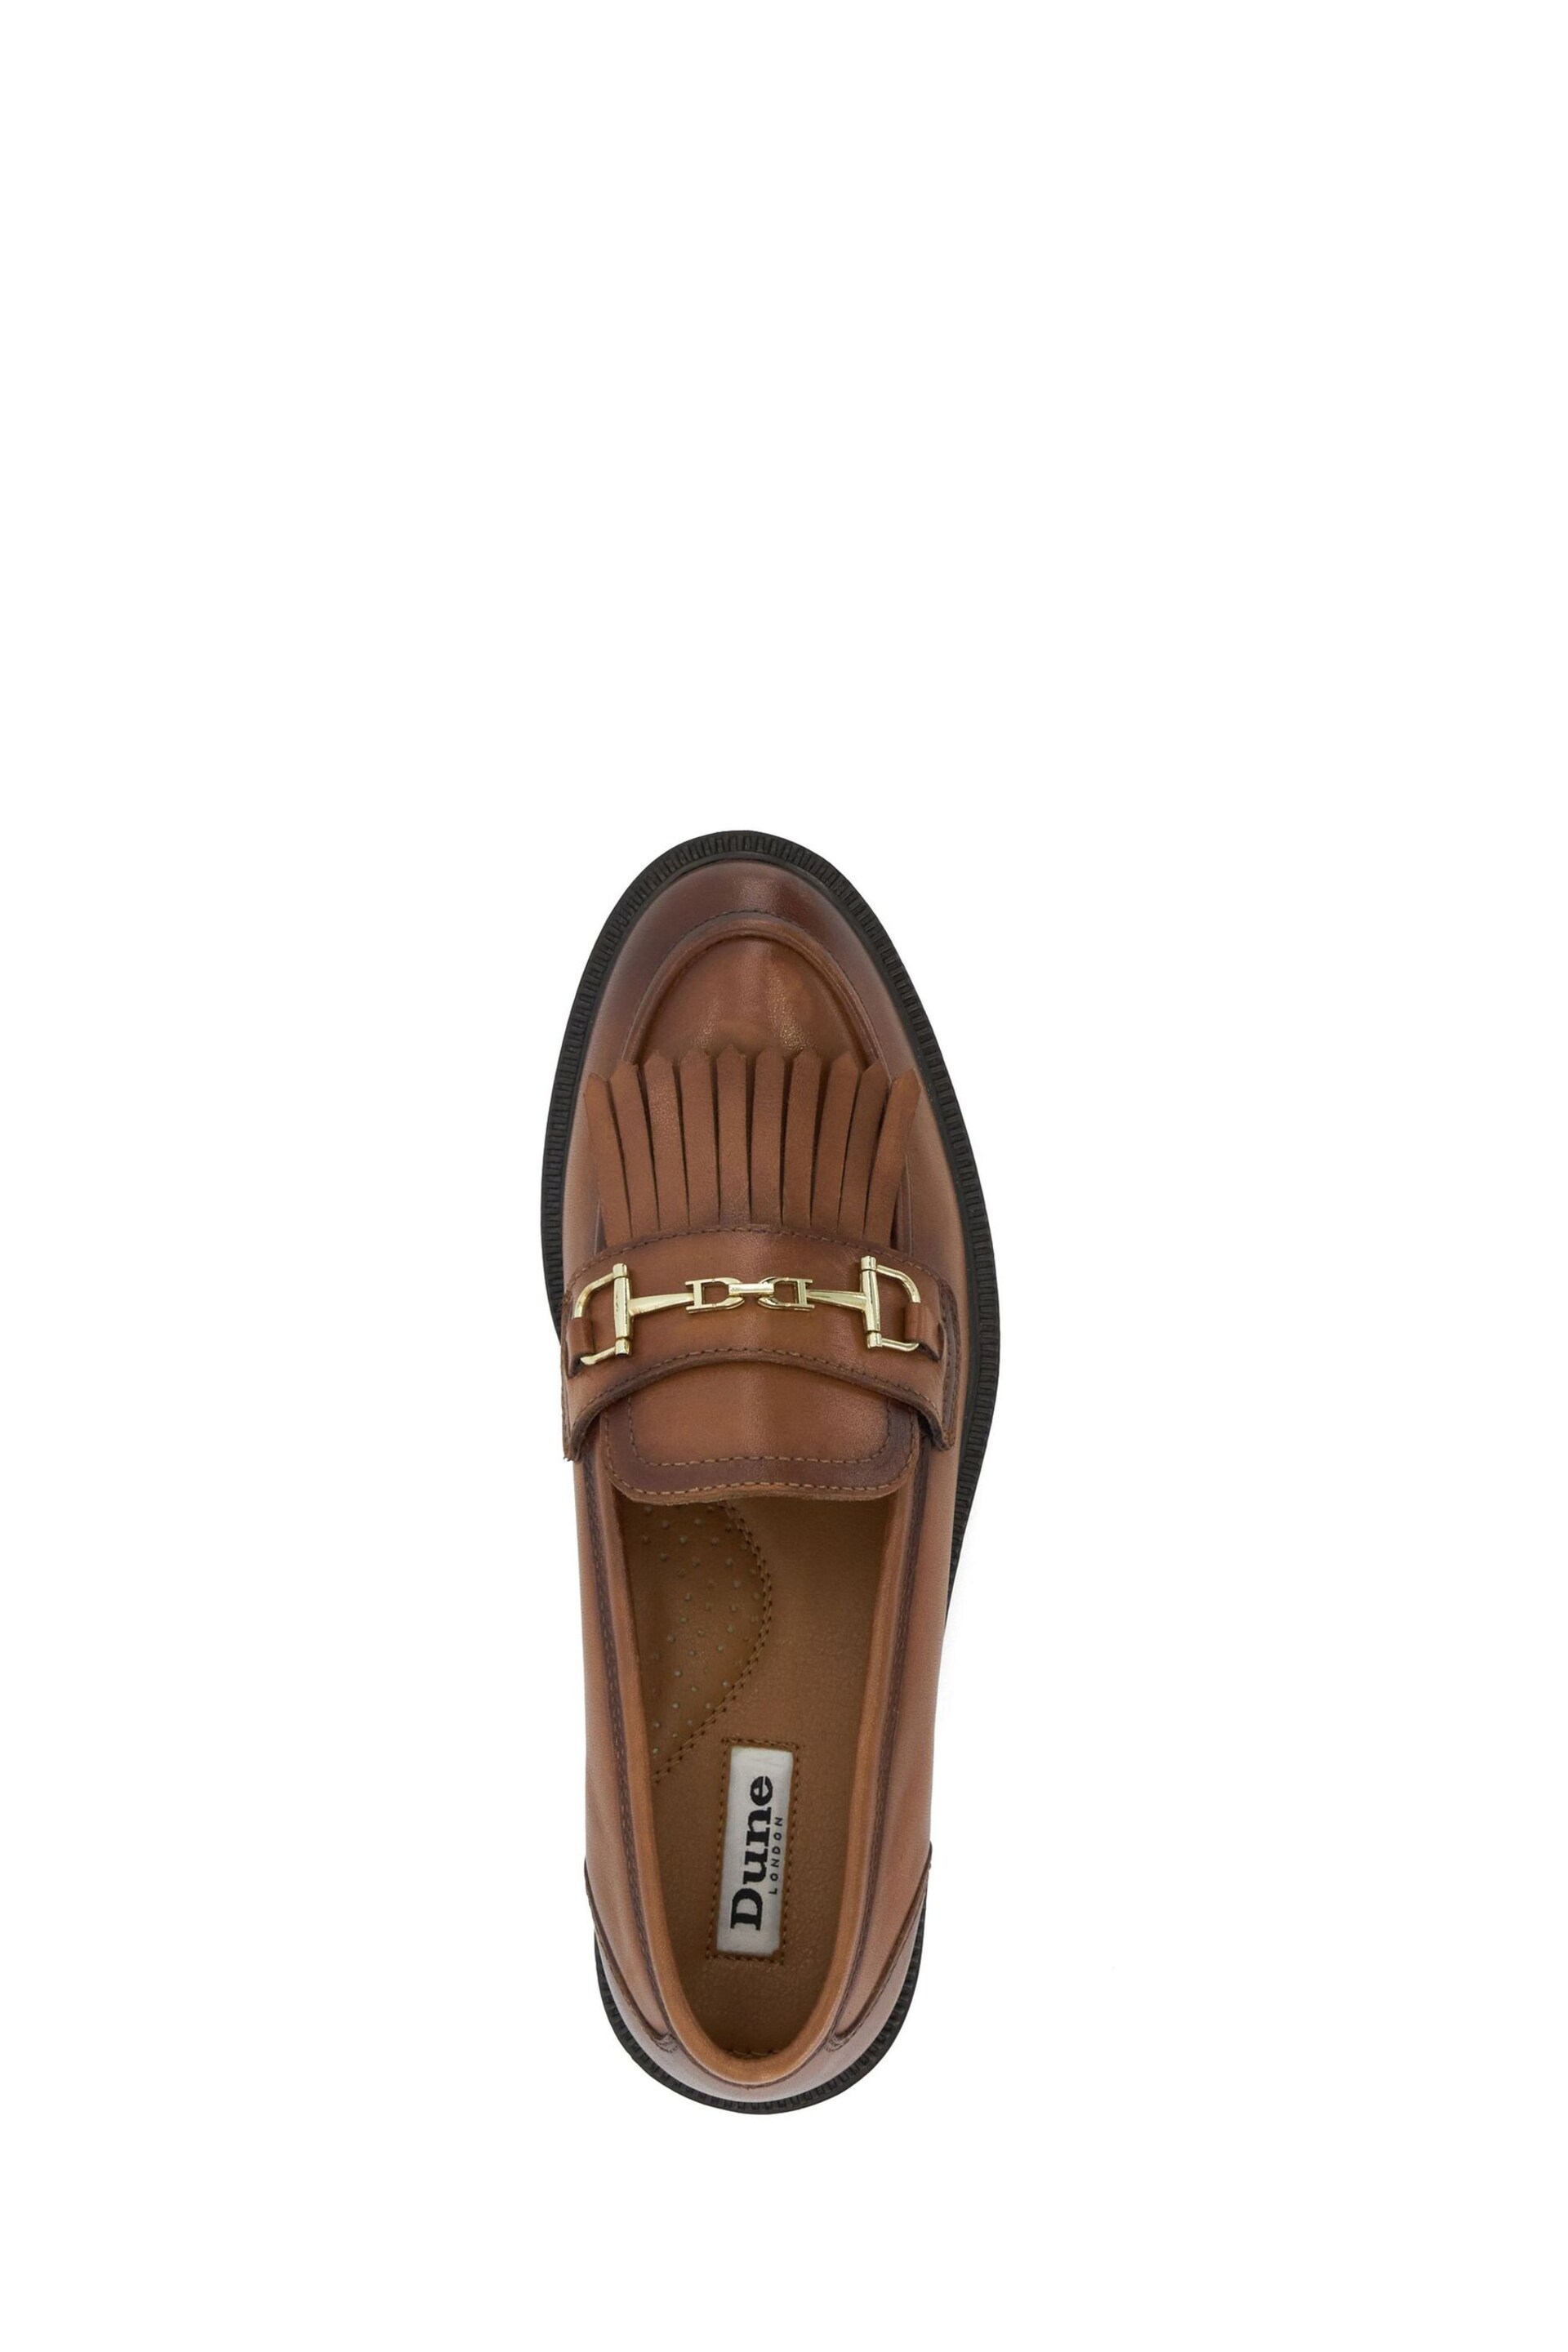 Dune London Brown Guided DD Snaffle Fringe Loafers - Image 5 of 7